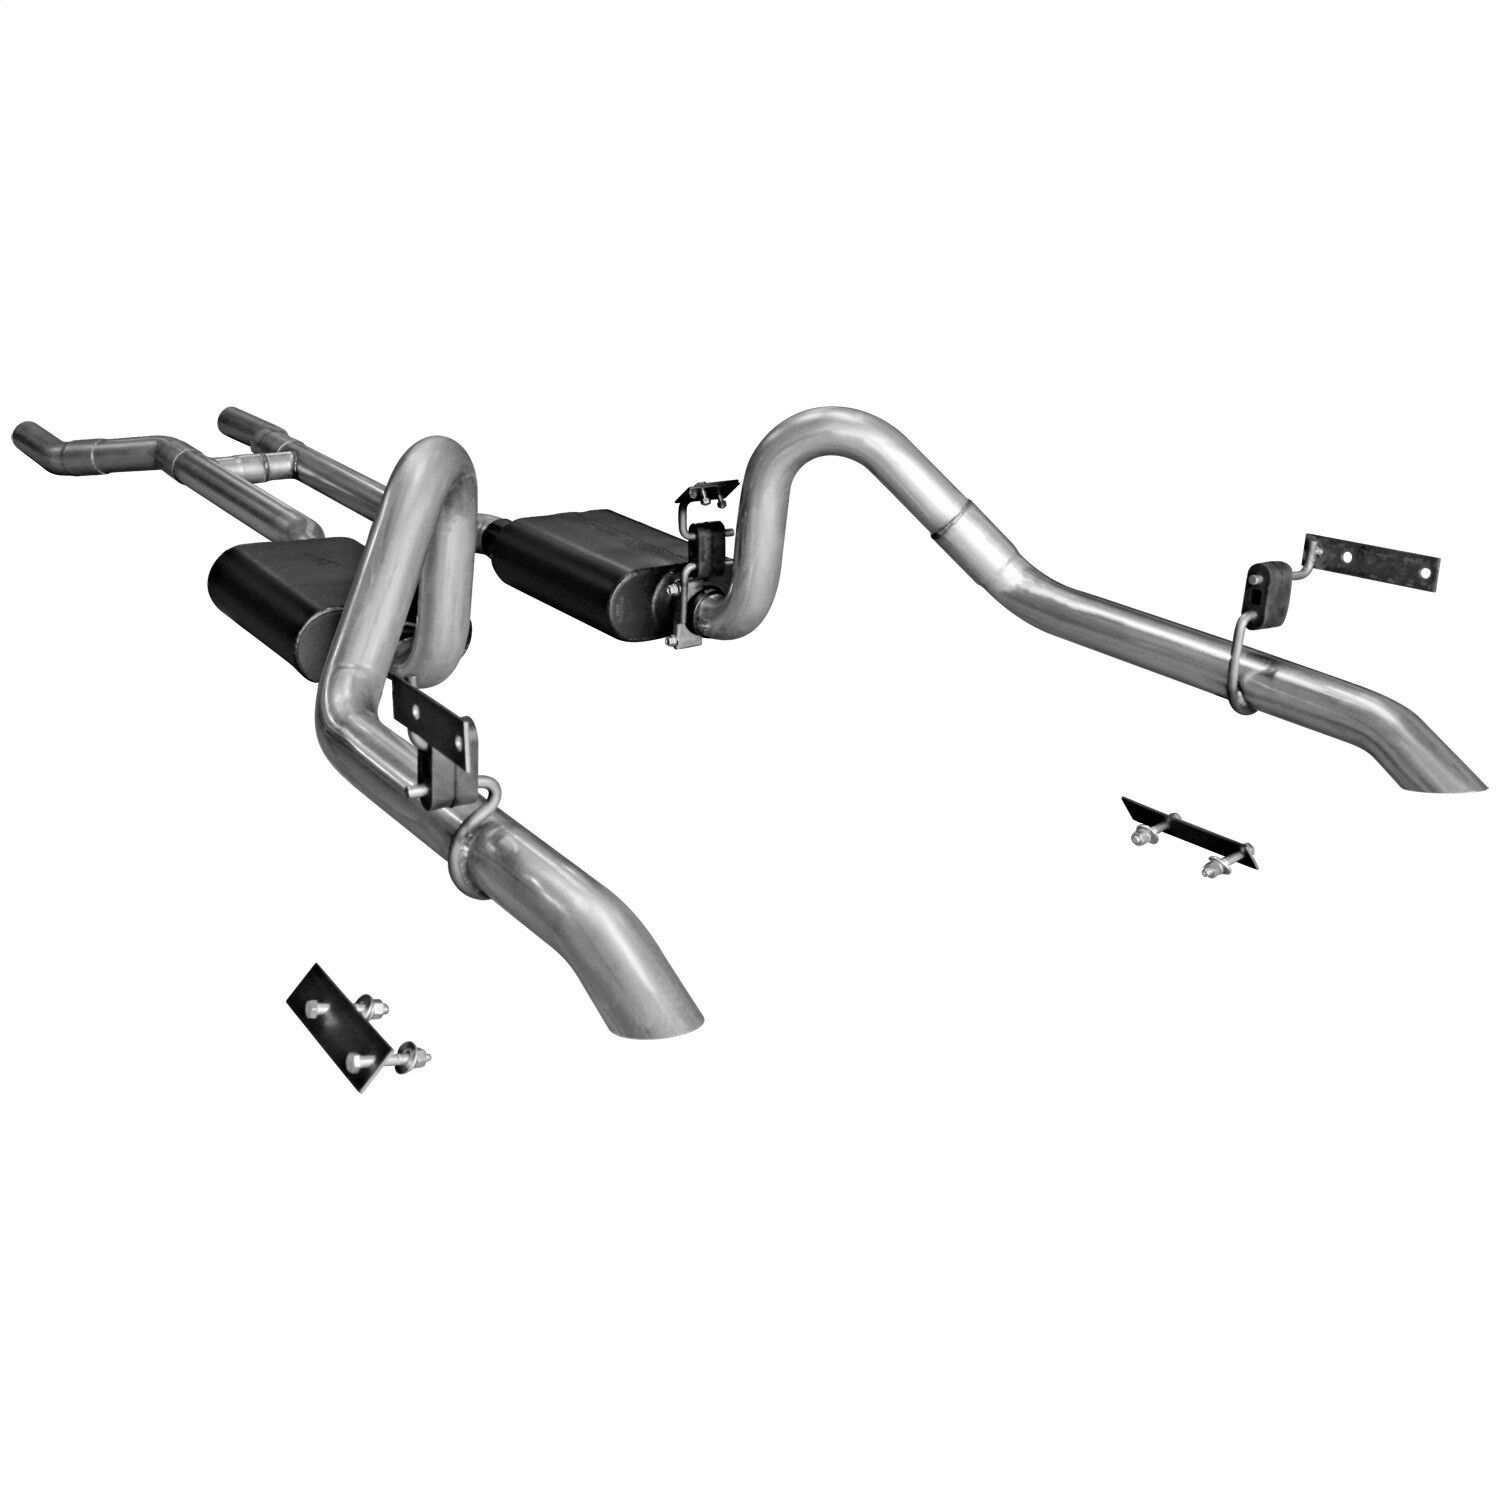 Flowmaster 17282 American Thunder Downpipe Back Exhaust System Fits Mustang